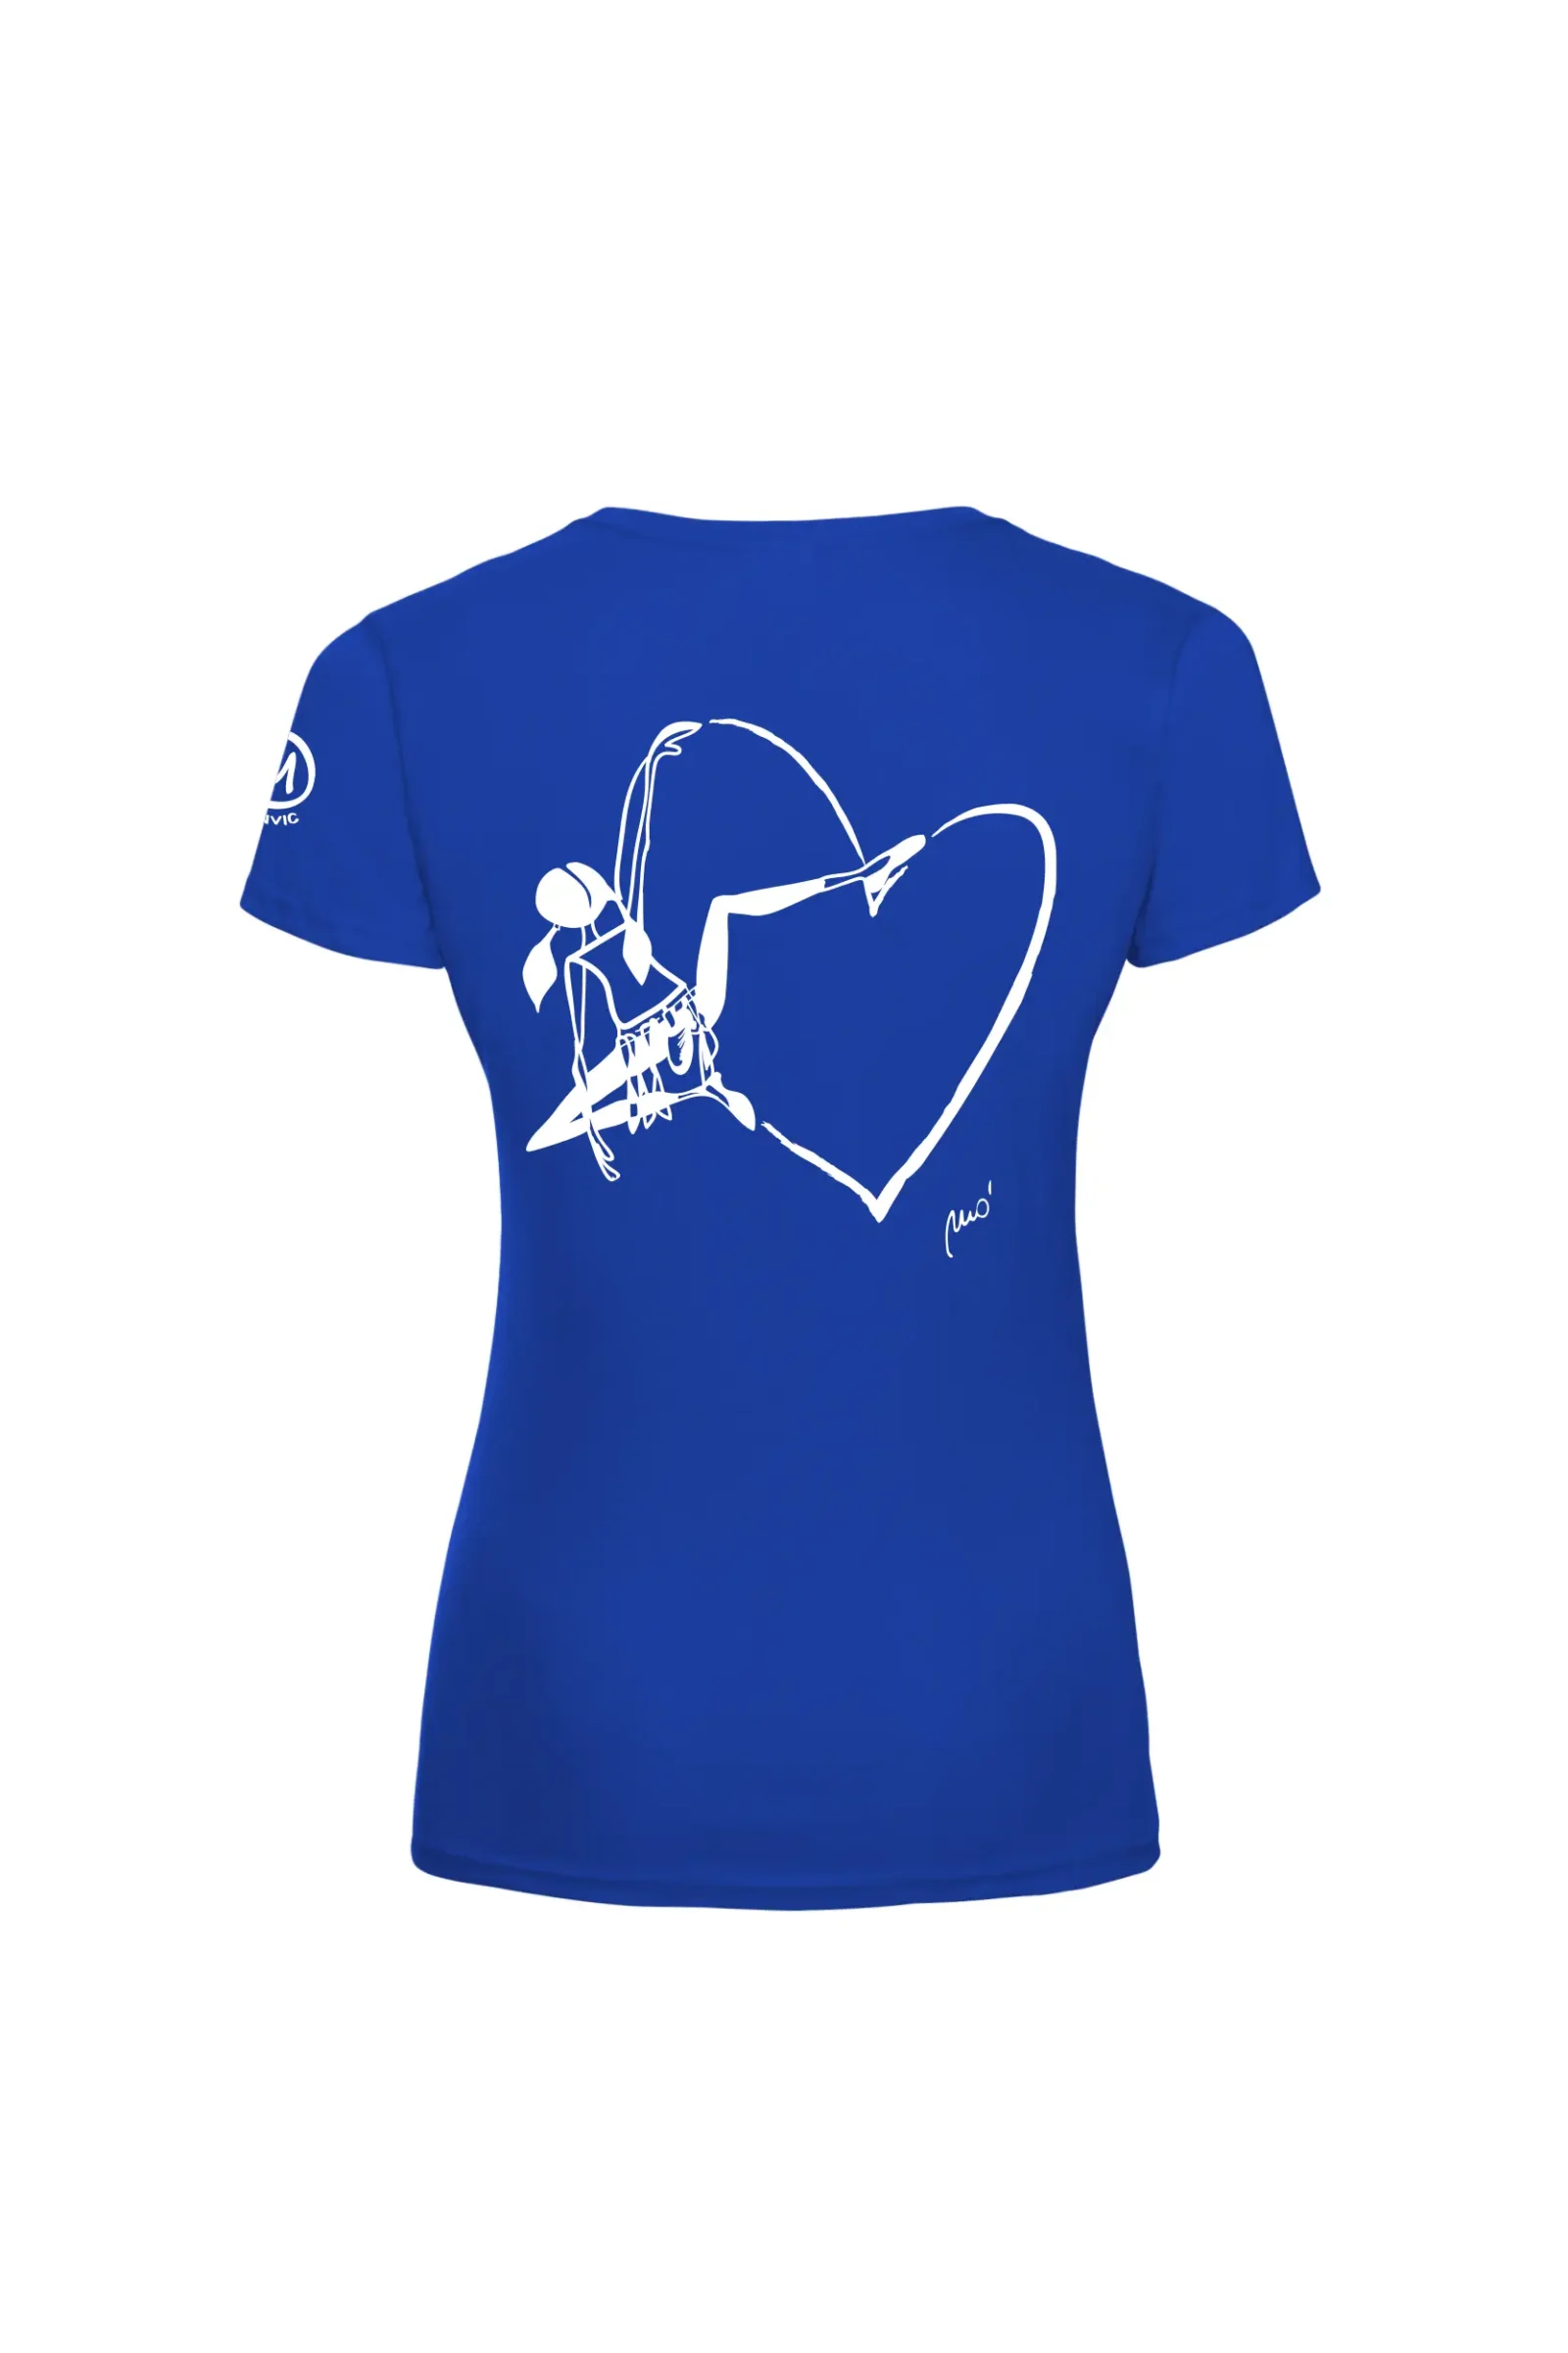 Women's climbing t-shirt - royal blue cotton - "Out" graphic - SHARON by MONVIC